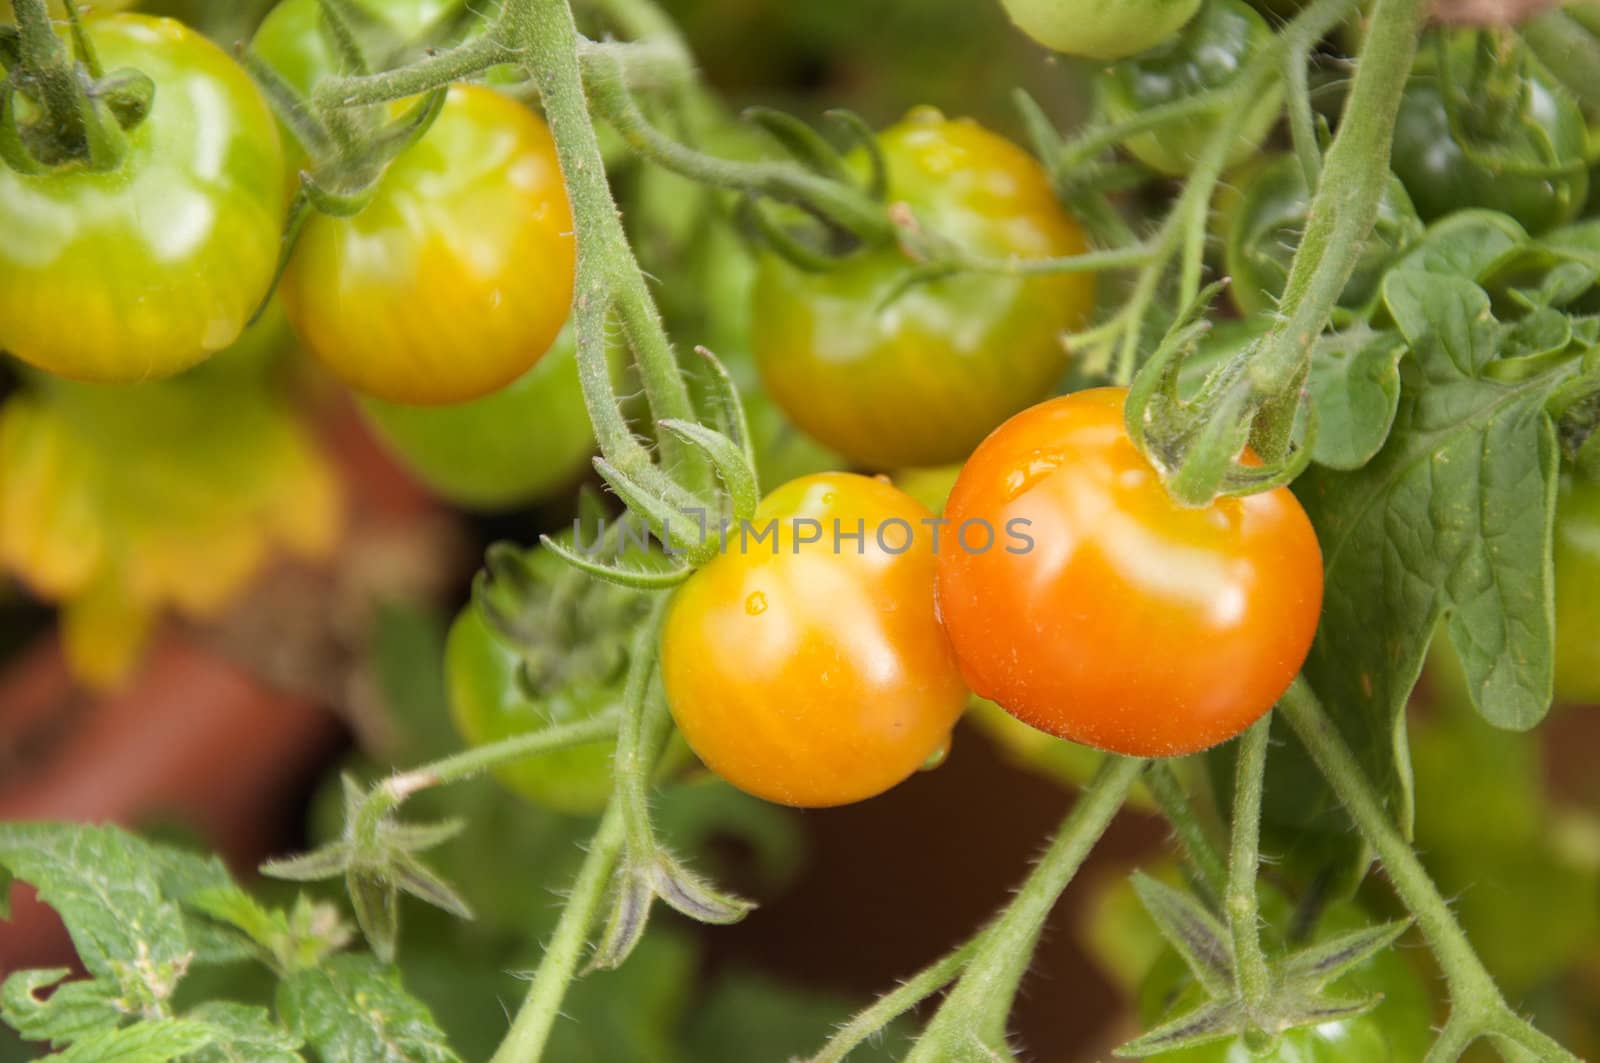 Tomatoes ripening in the garden by kdreams02